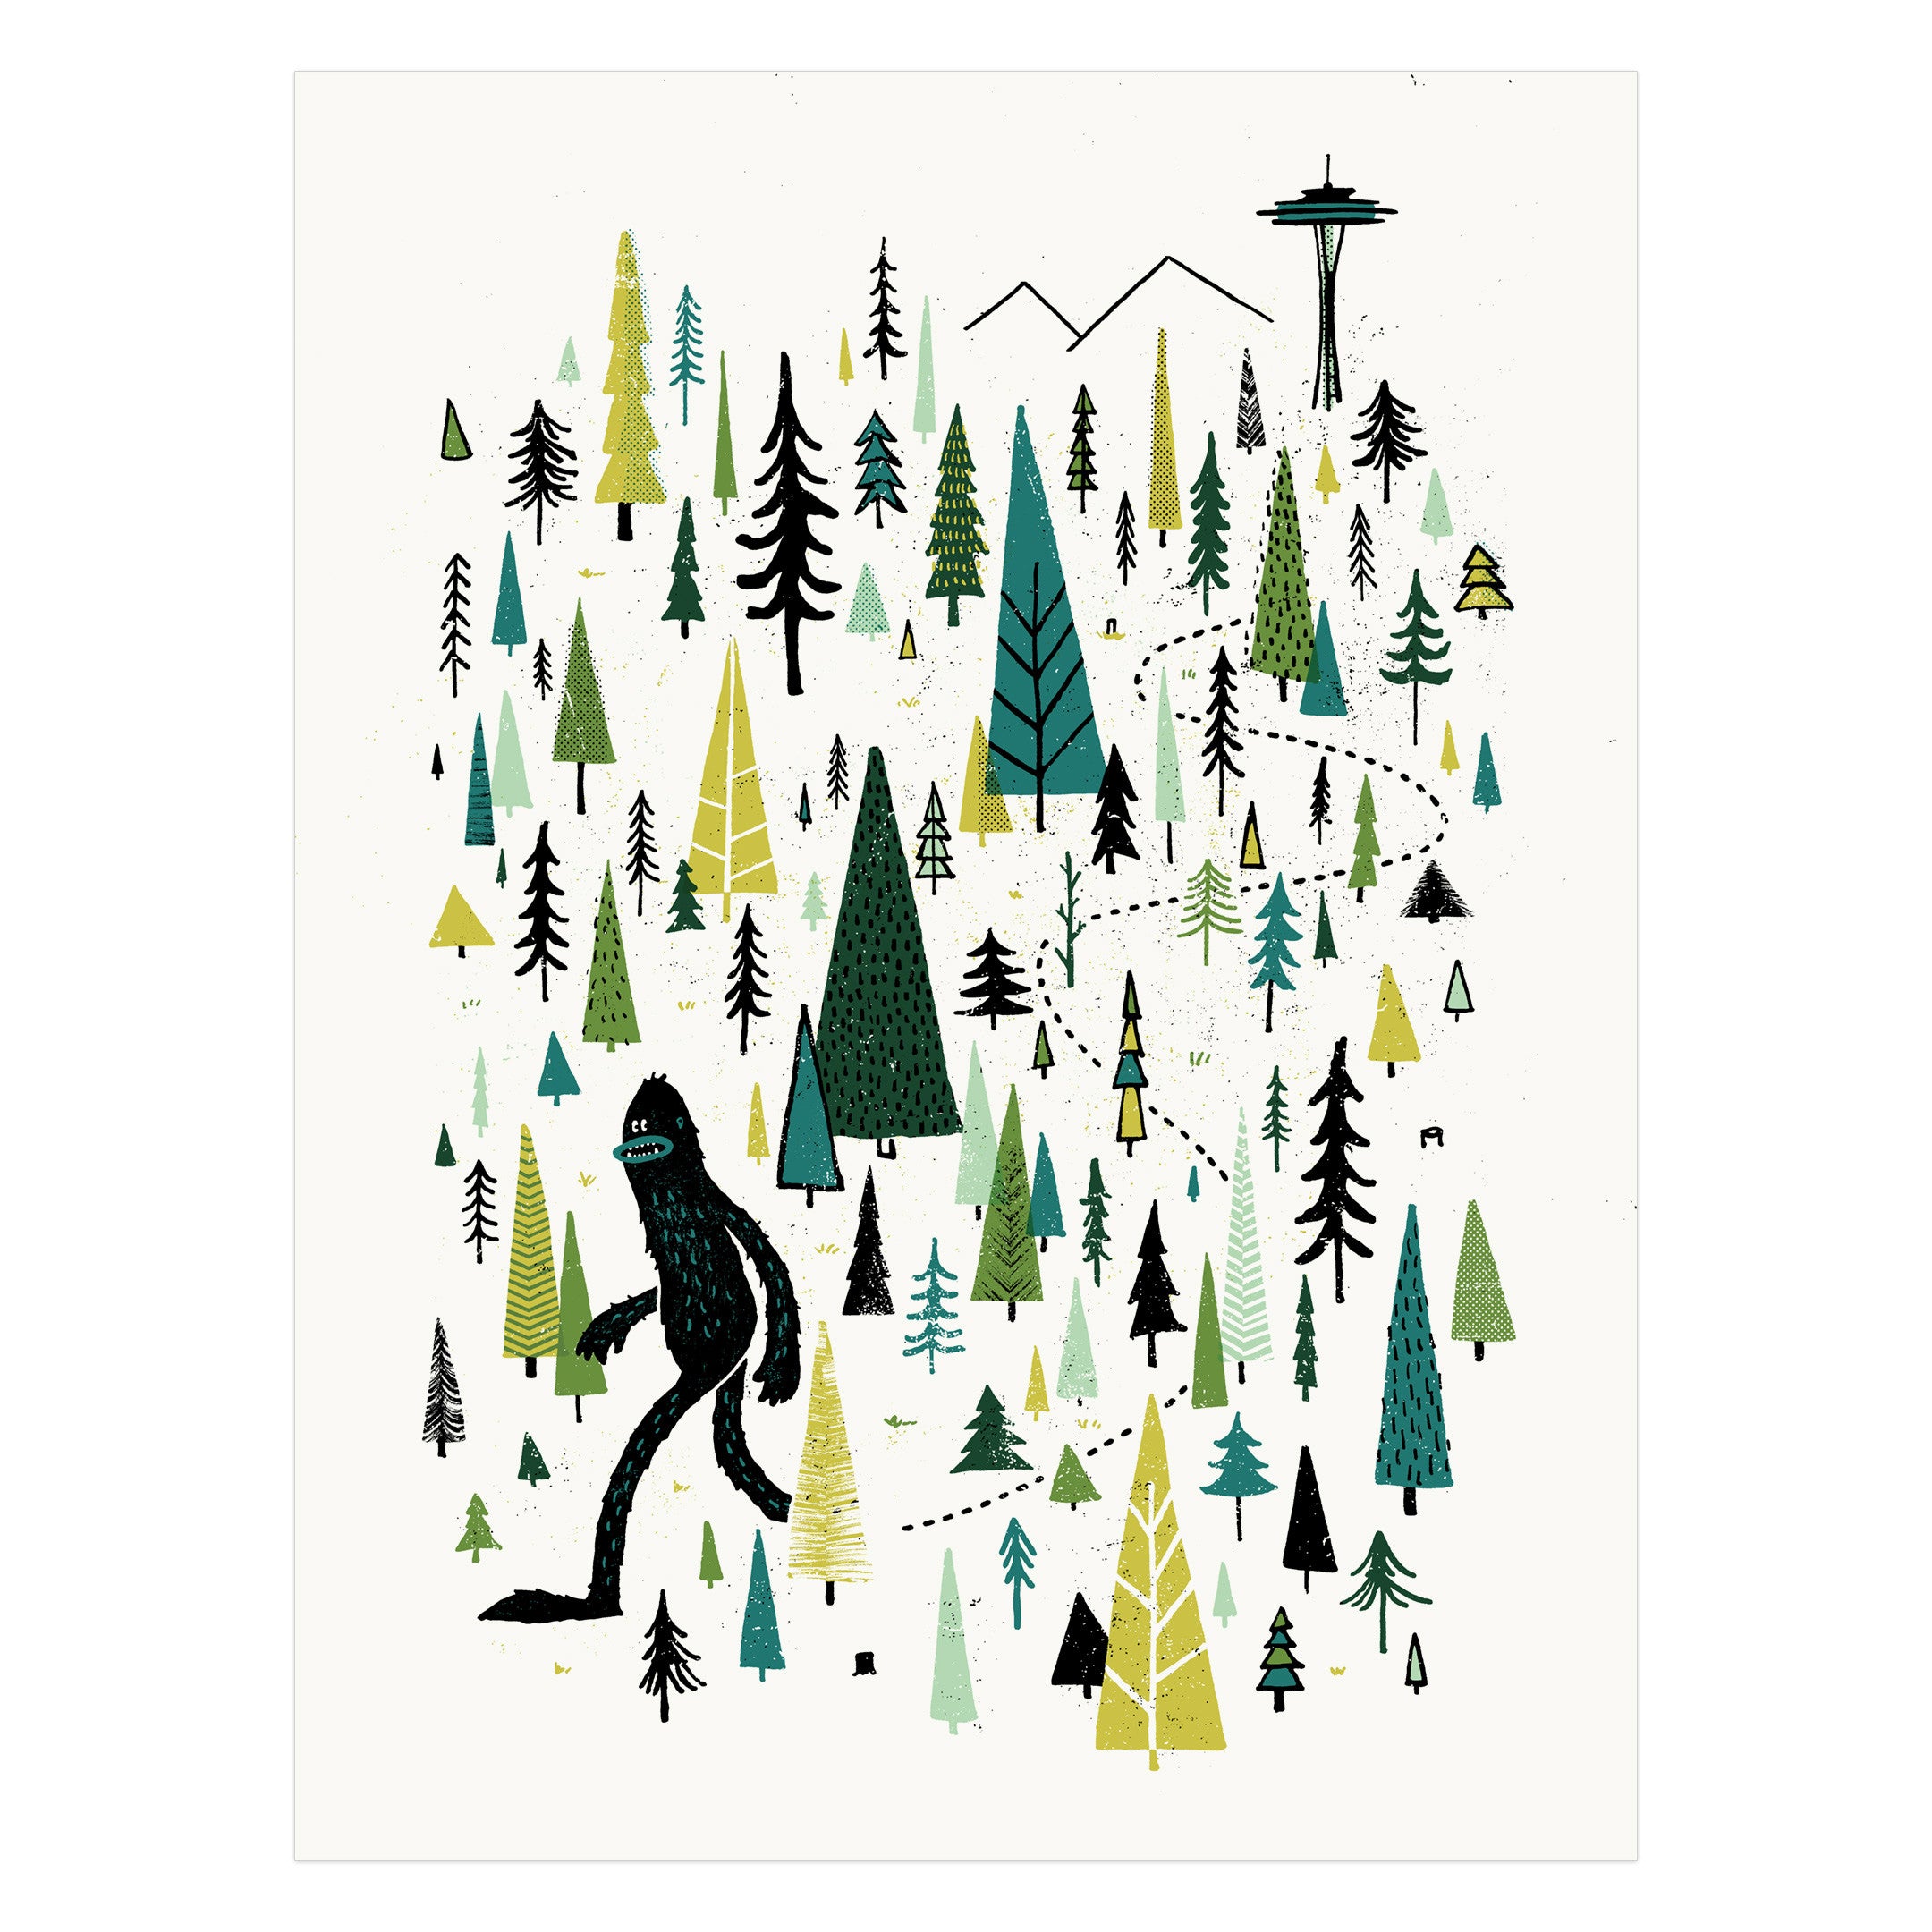 Sasquatch or Big Foot walking in the forest from mountains and the Seattle Space Needle. The illustration is screen printed on white paper with various greens and black inks.